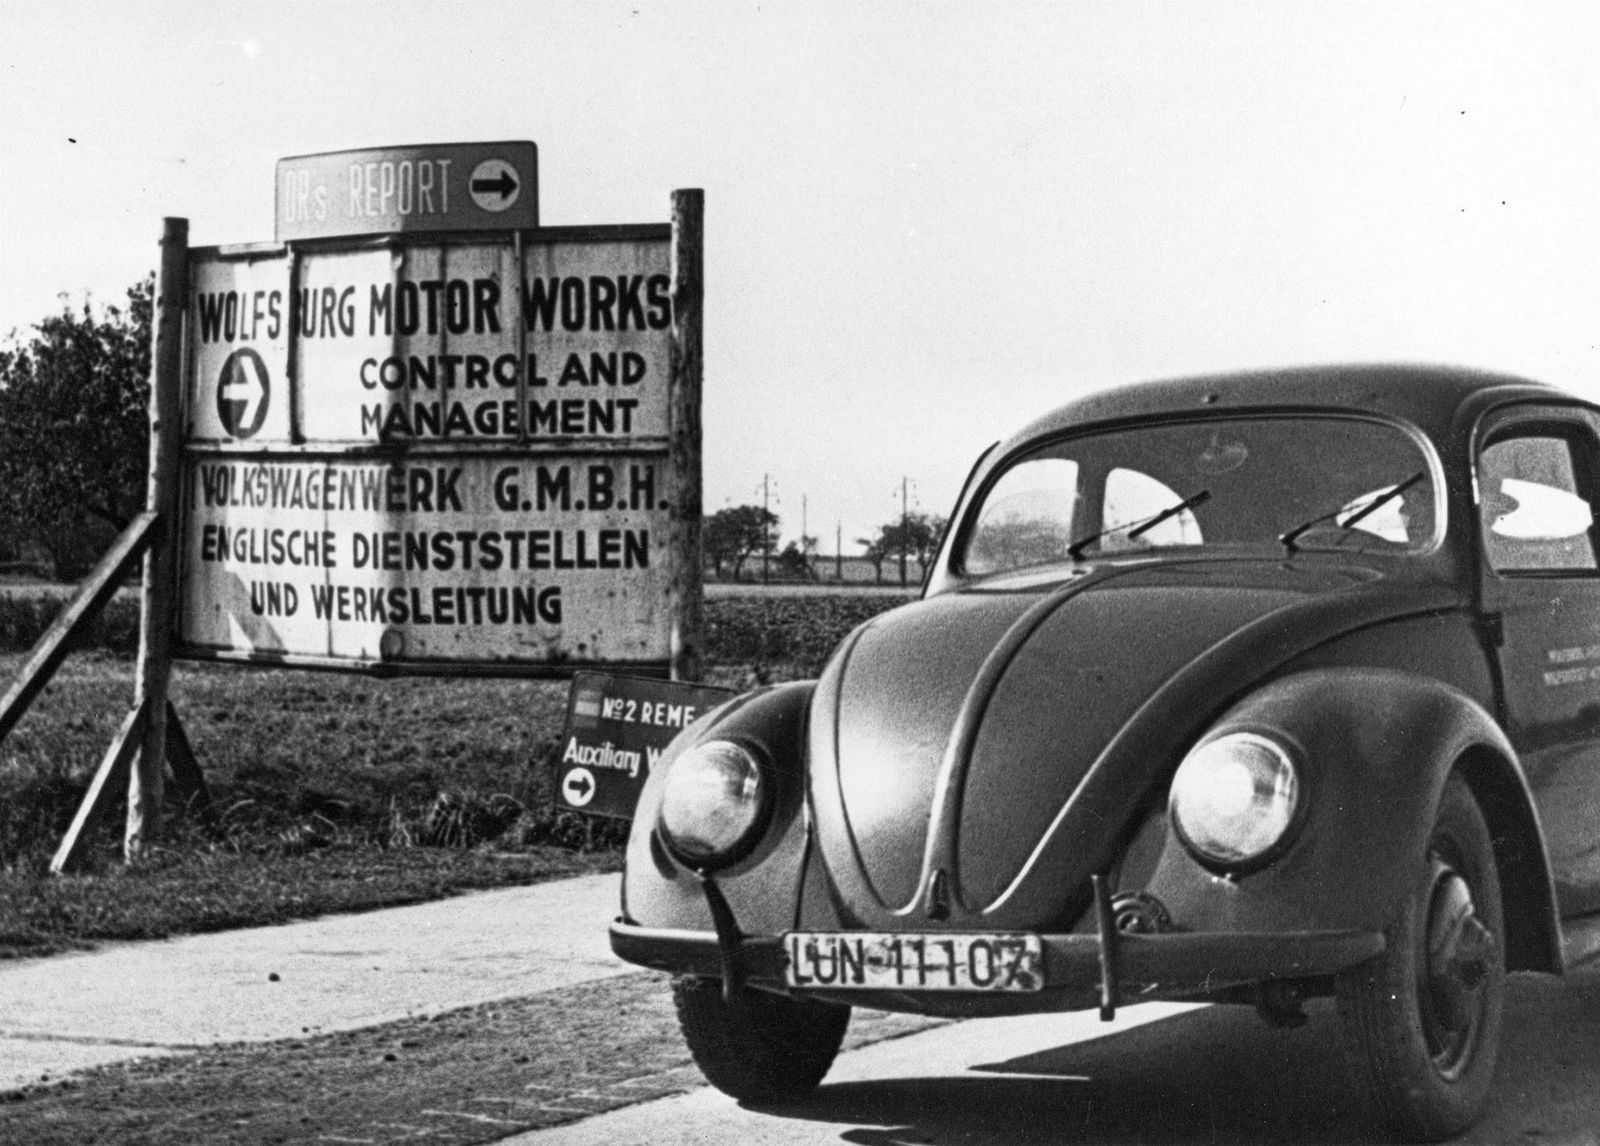 Production launch for an icon: The first VW Beetle rolled off the line at the Wolfsburg plant 70 years ago